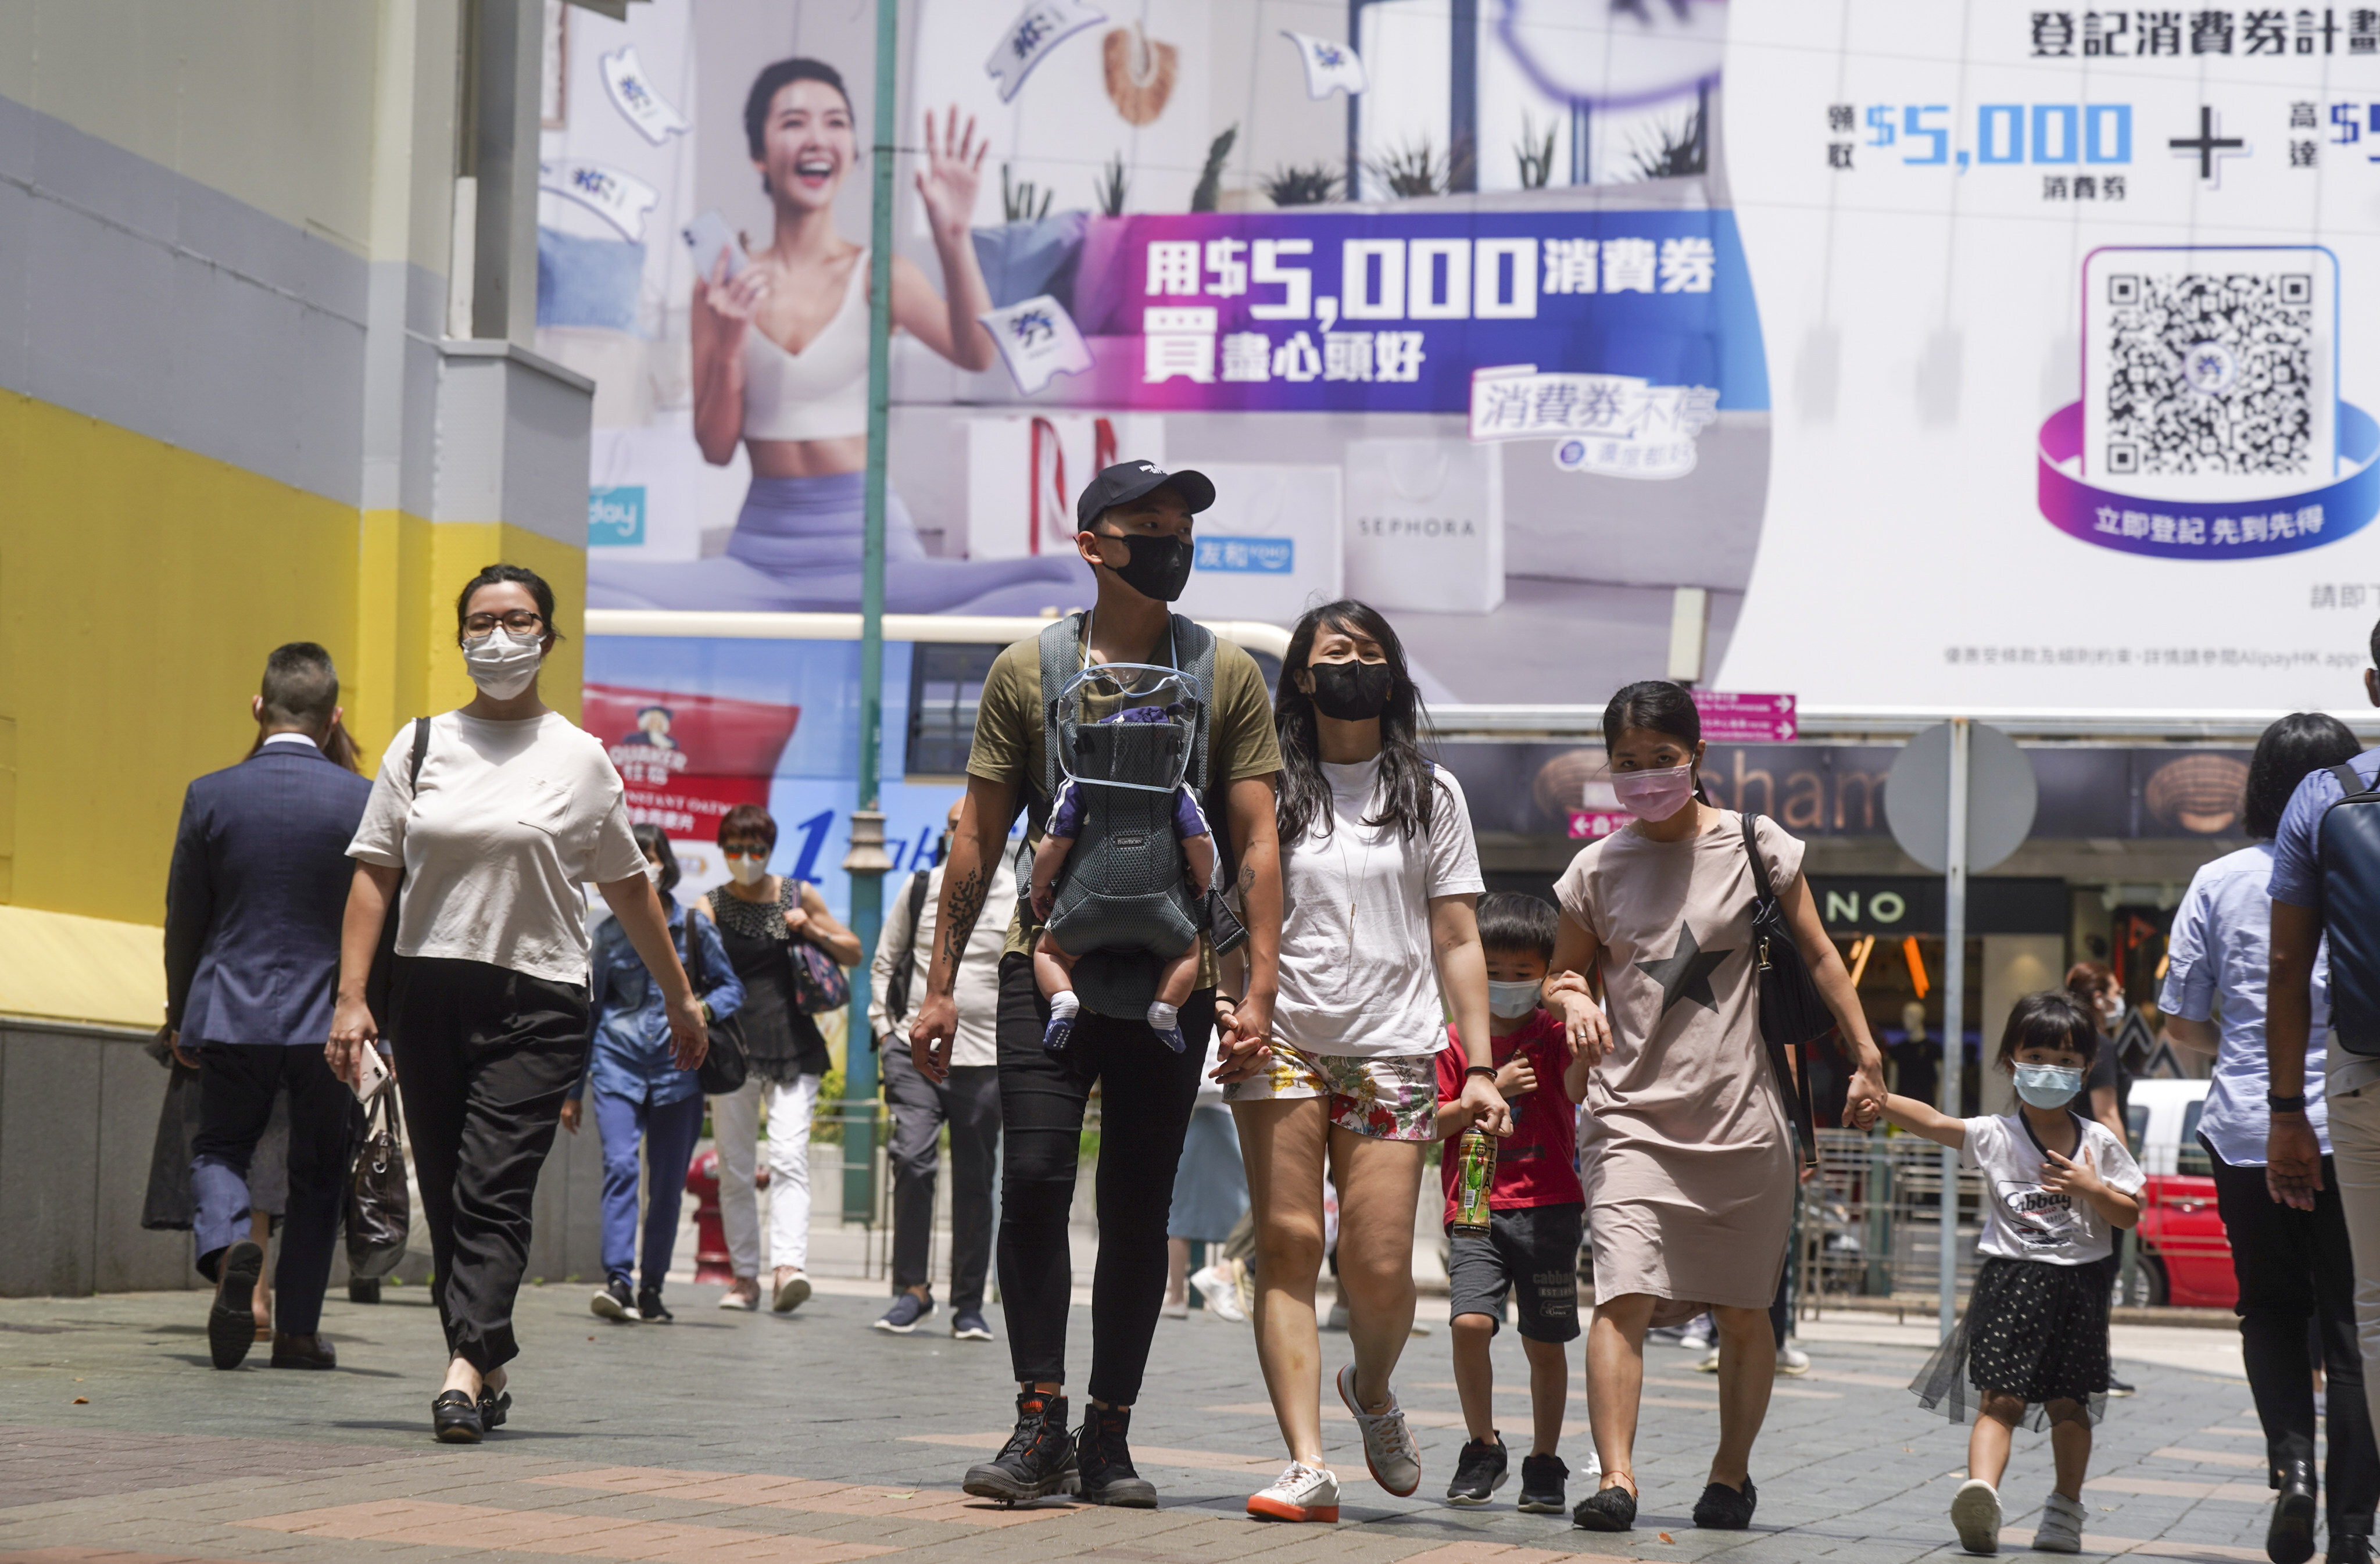 Hong Kong’s mall owners are tempting shoppers with discounts and offers with an eye on the HK$5,000 e-vouchers that will issued to 6.2 million eligible residents from Thursday. Photo: Sam Tsang